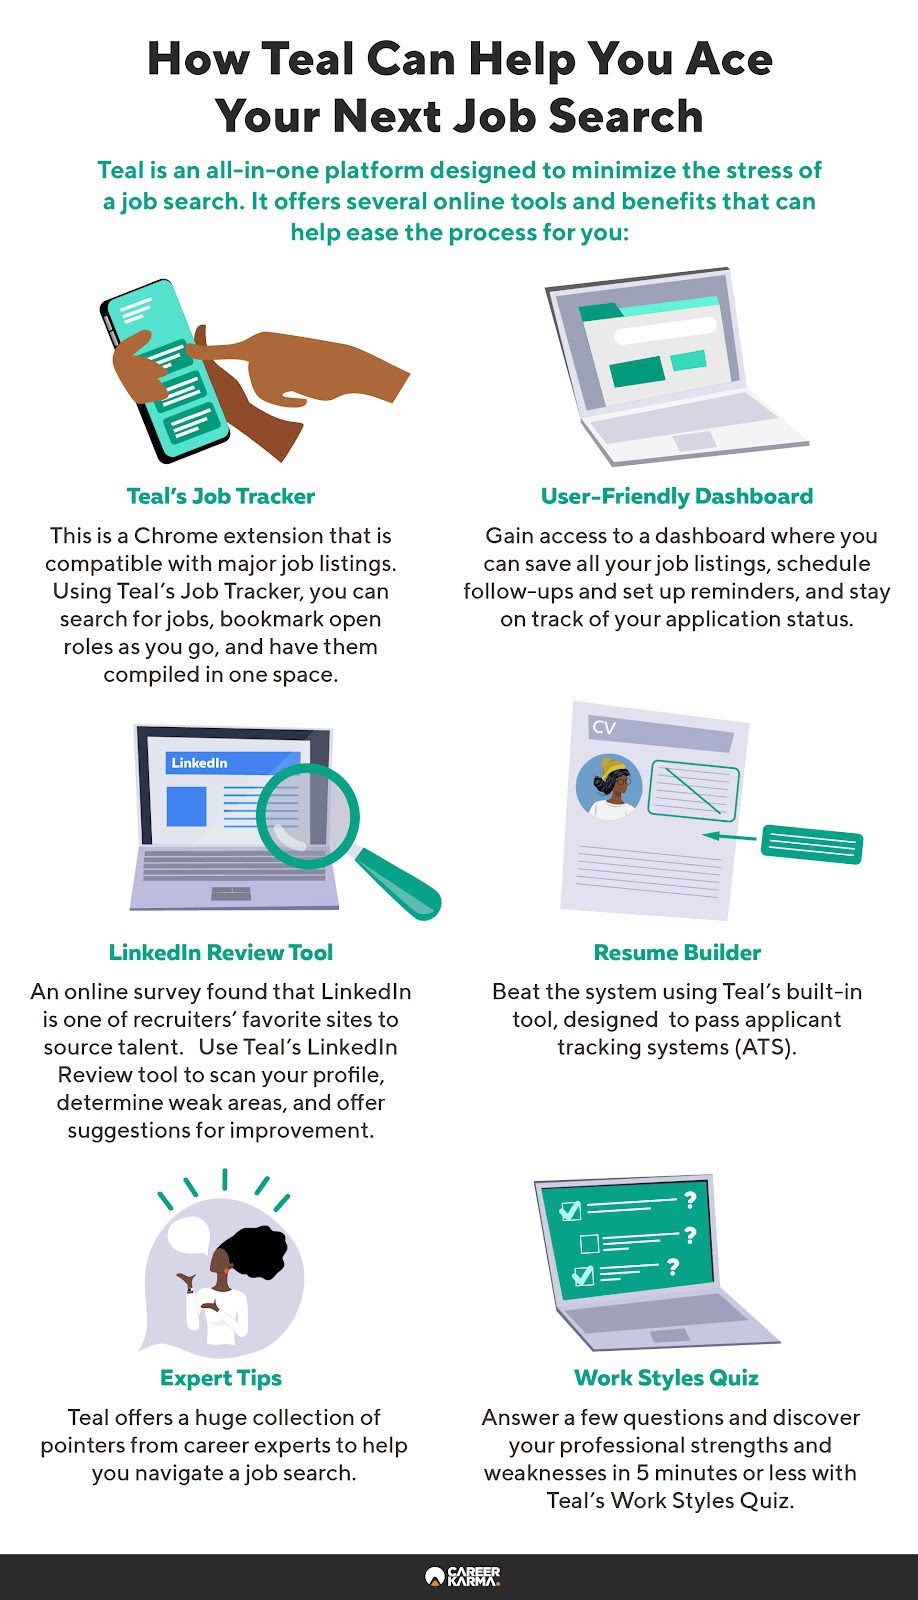 An infographic covering how Teal job search tracker works